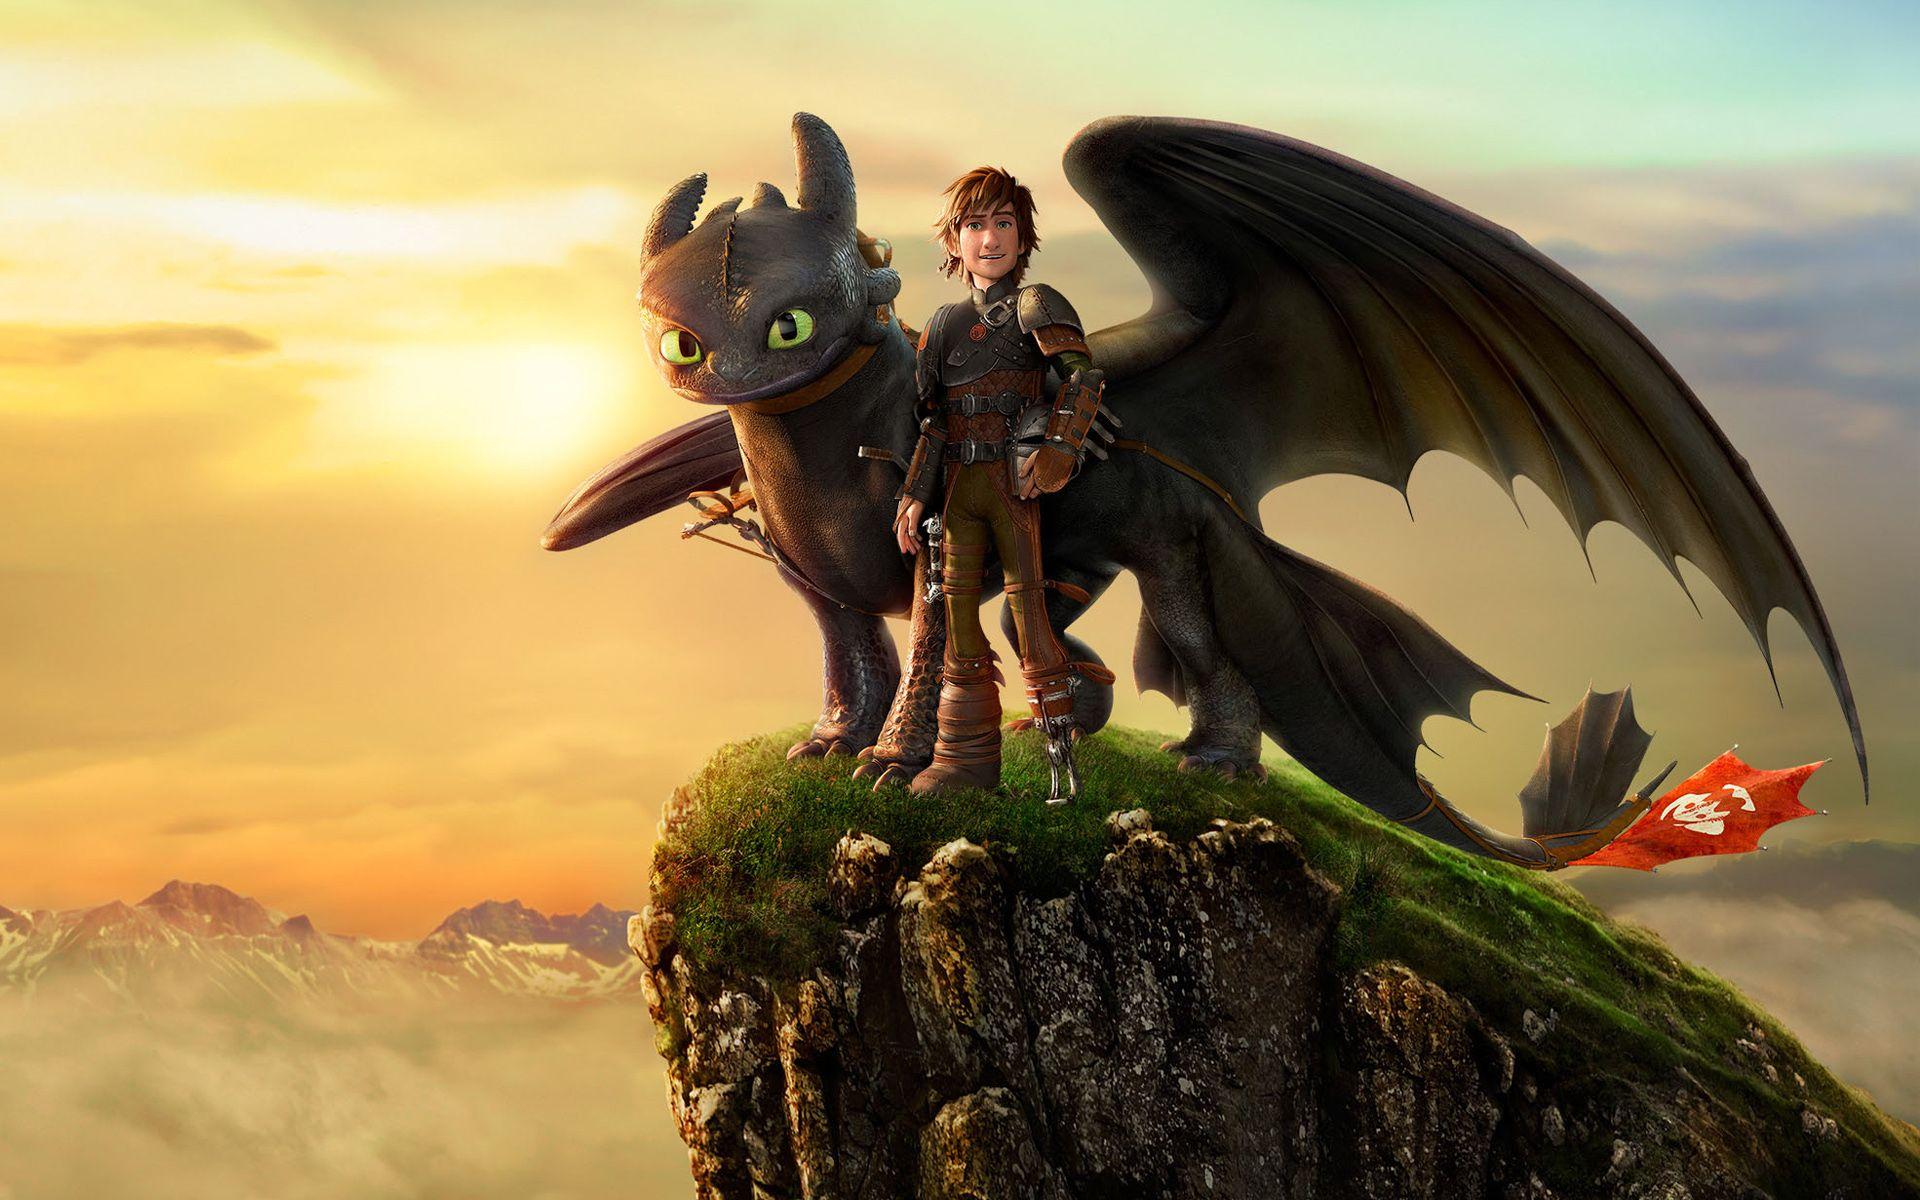 How To Train Your Dragon 2 Baby Dragons